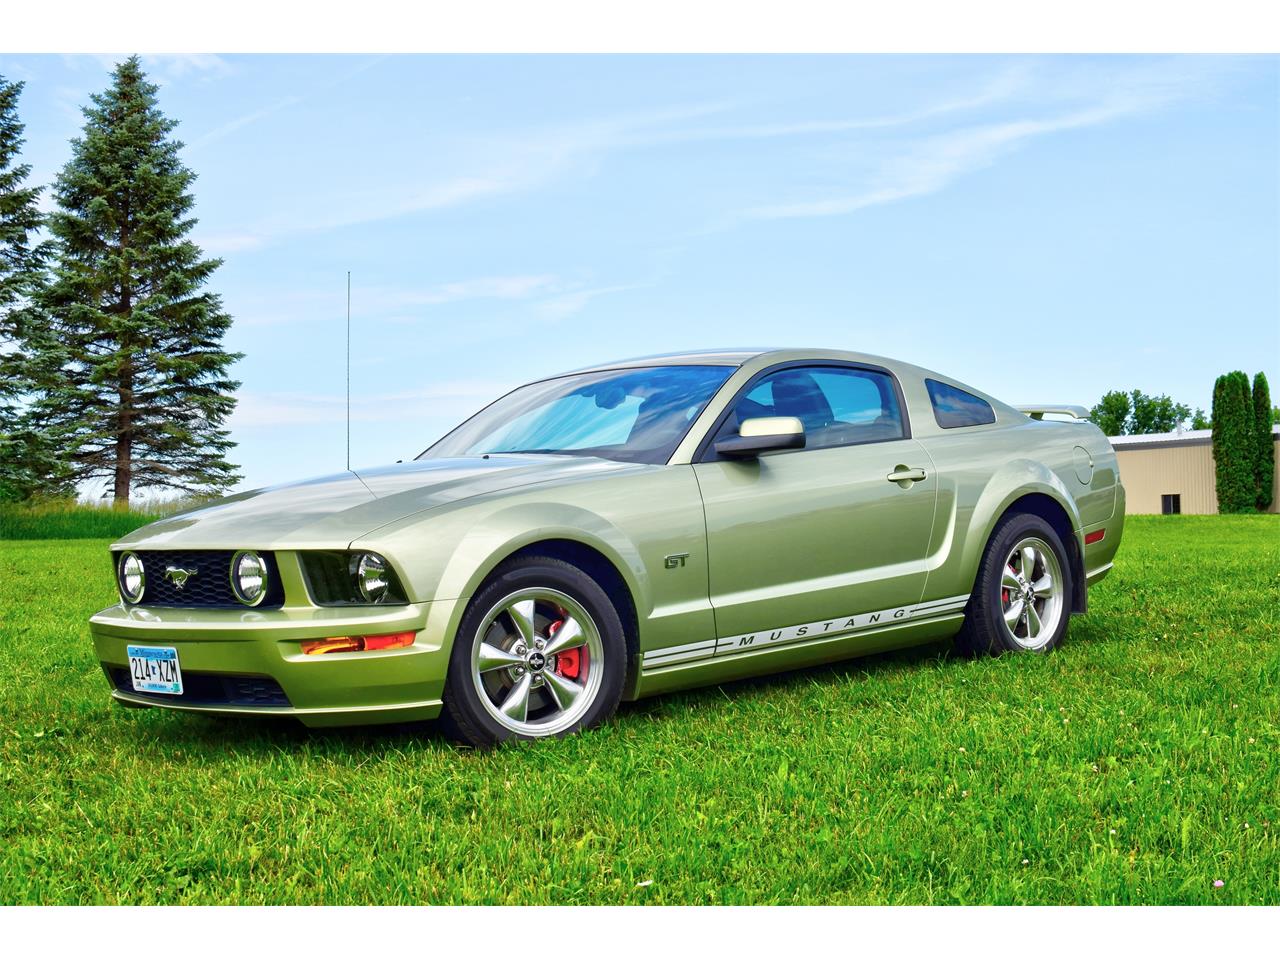  2005  Ford  Mustang  for Sale ClassicCars com CC 1231929